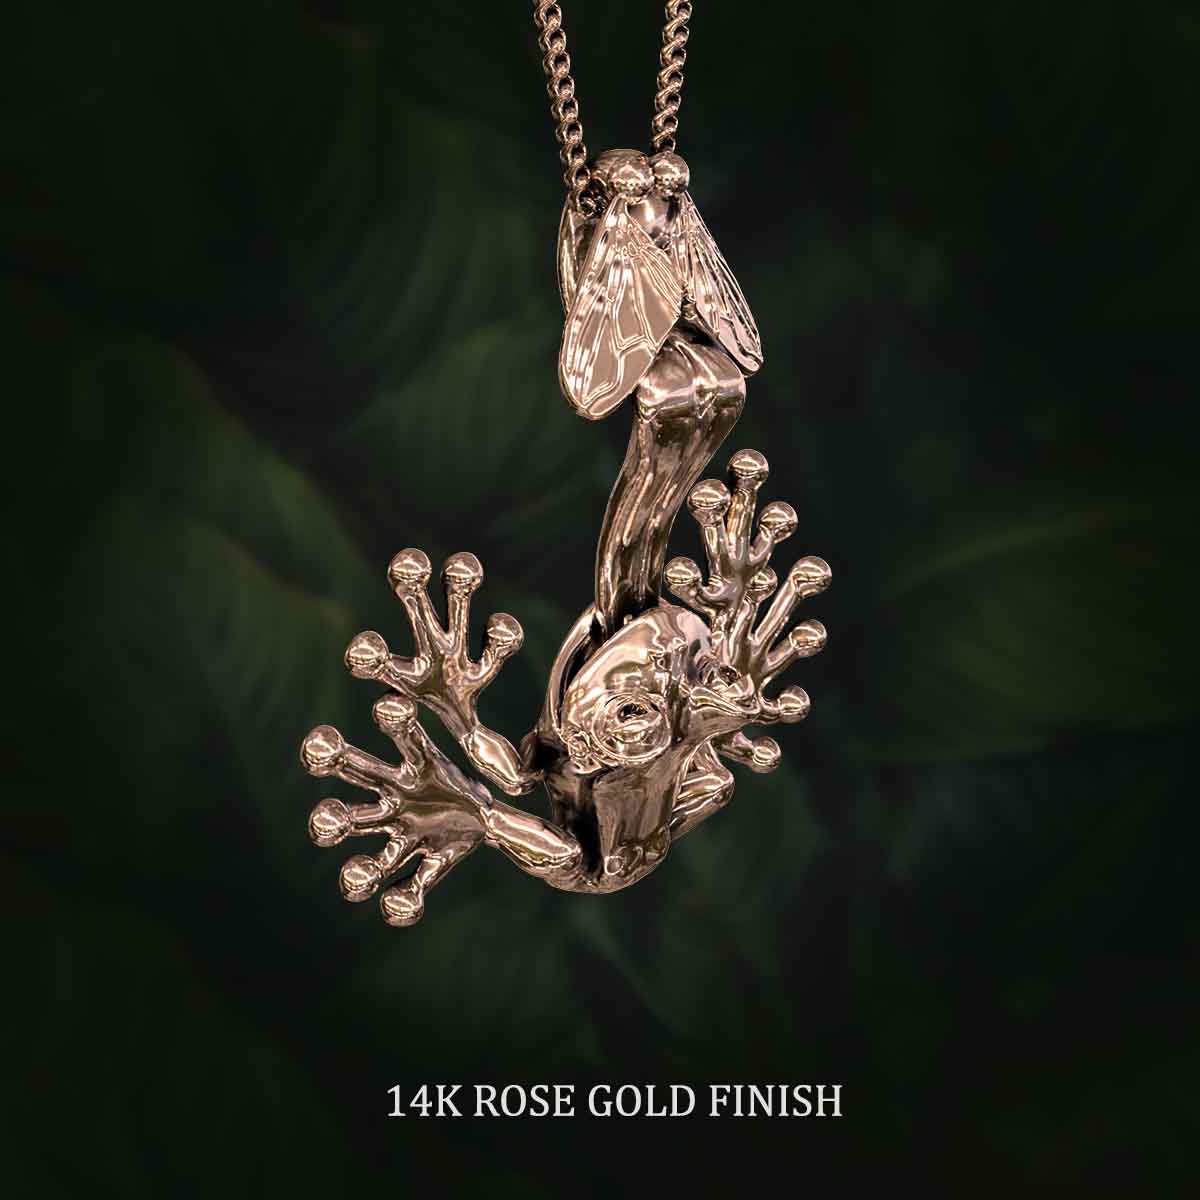     14K-Rose-Gold-Finish-Frog-Catching-Fly-With-Tongue-Pendant-Jewelry-For-Necklace